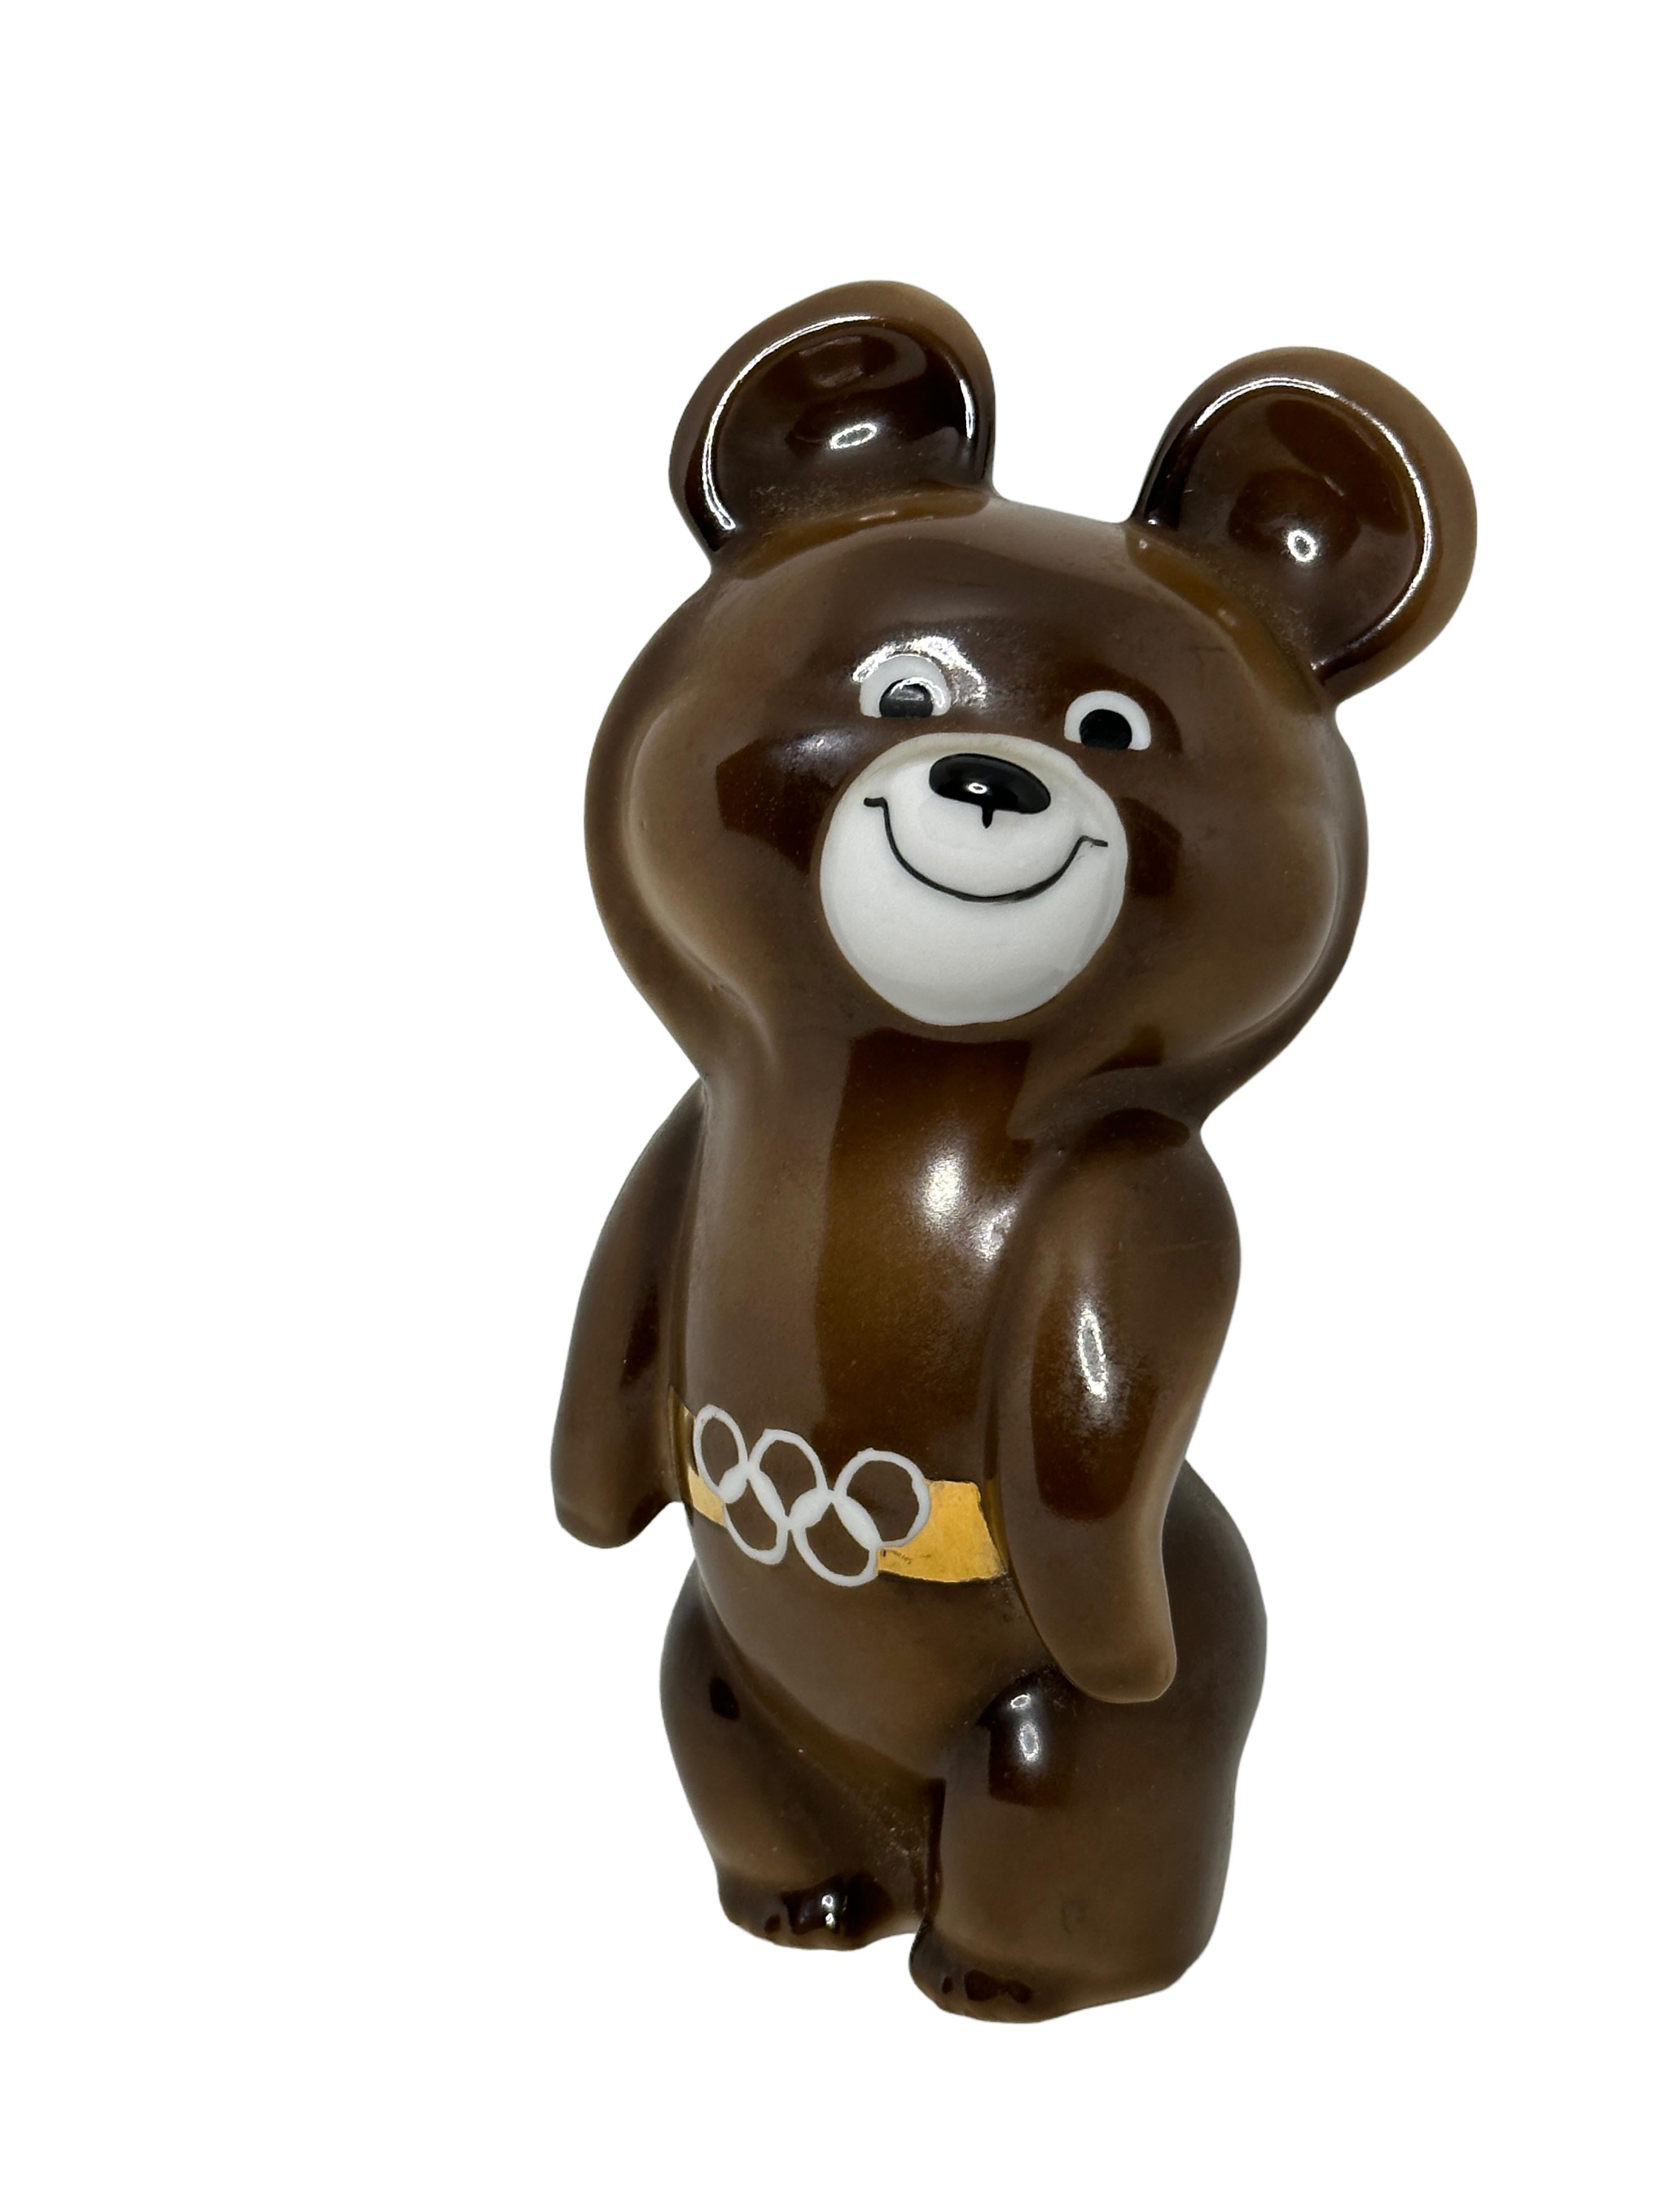 Original vintage Soviet sport Mascot for the 22nd Summer Olympic Games (Games of the XXII Olympiad) in 1980 held in Moscow Russia, Misha the Moscow Olympic Games mascot, wearing an Olympic Rings belt. Nice addition to any collection.